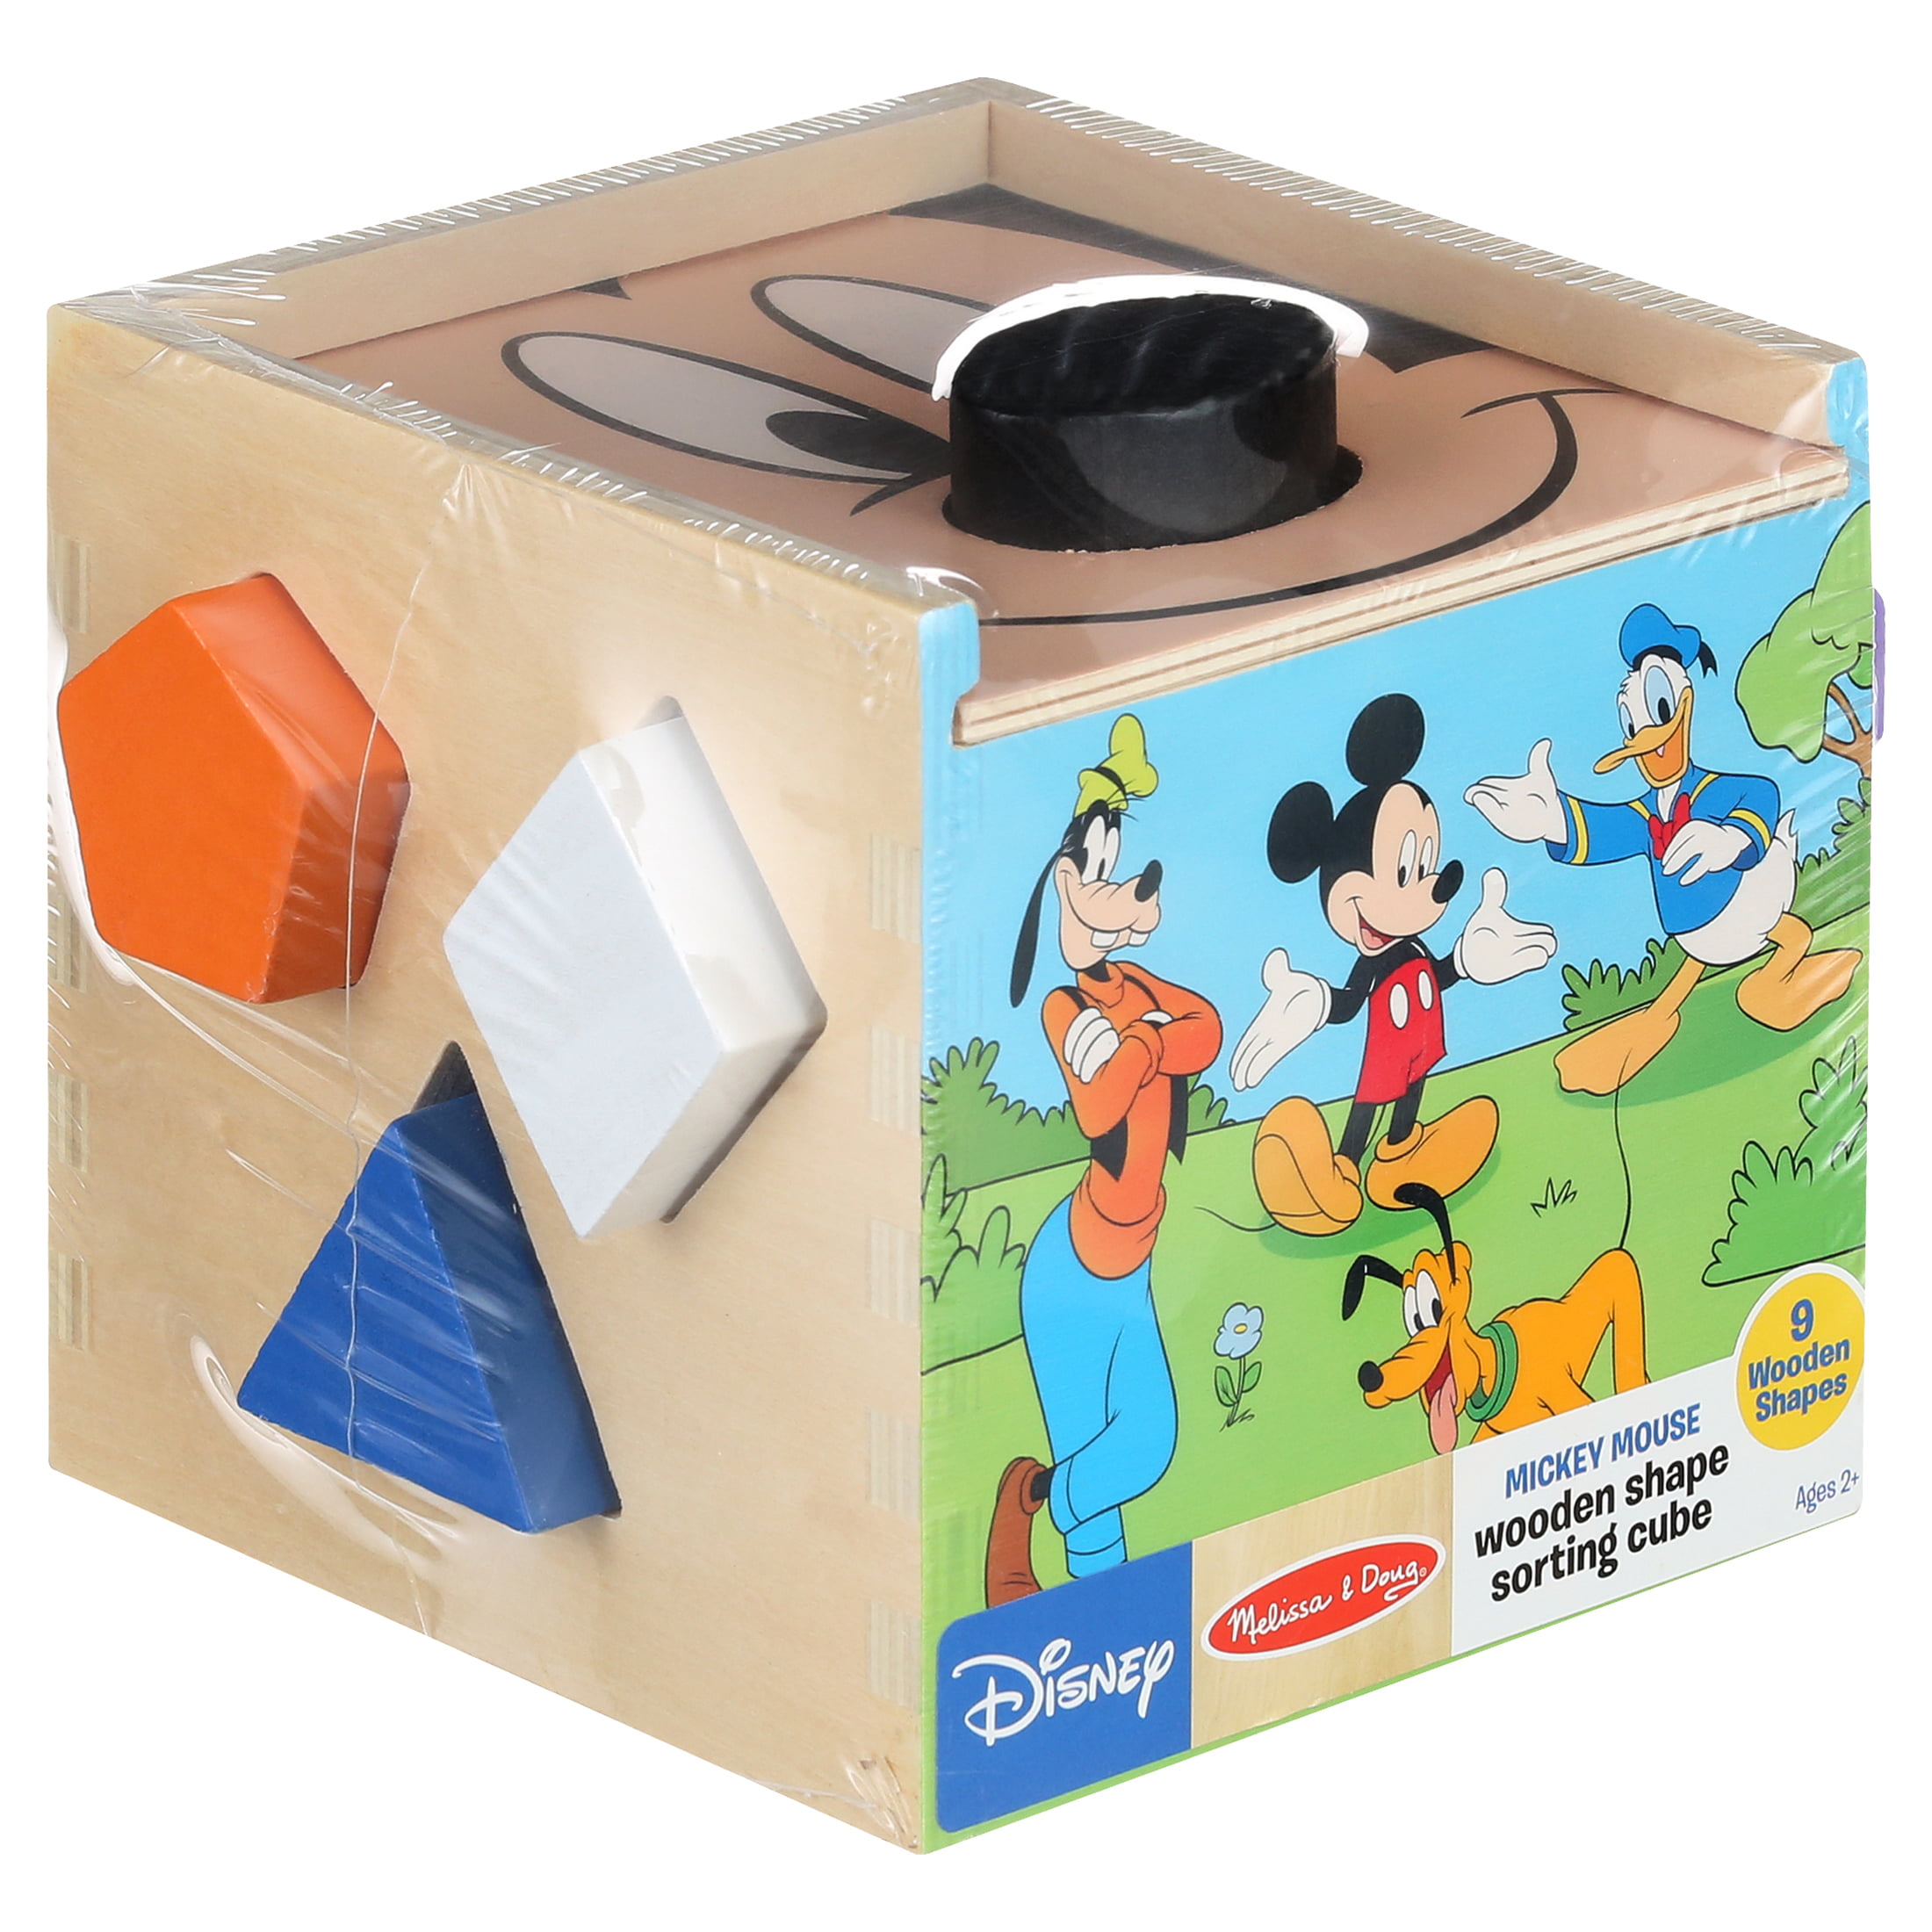 Details about   Disney Melissa & Doug Mickey Mouse Wooden Shape Sorting Clock Cube & Tool Kit 